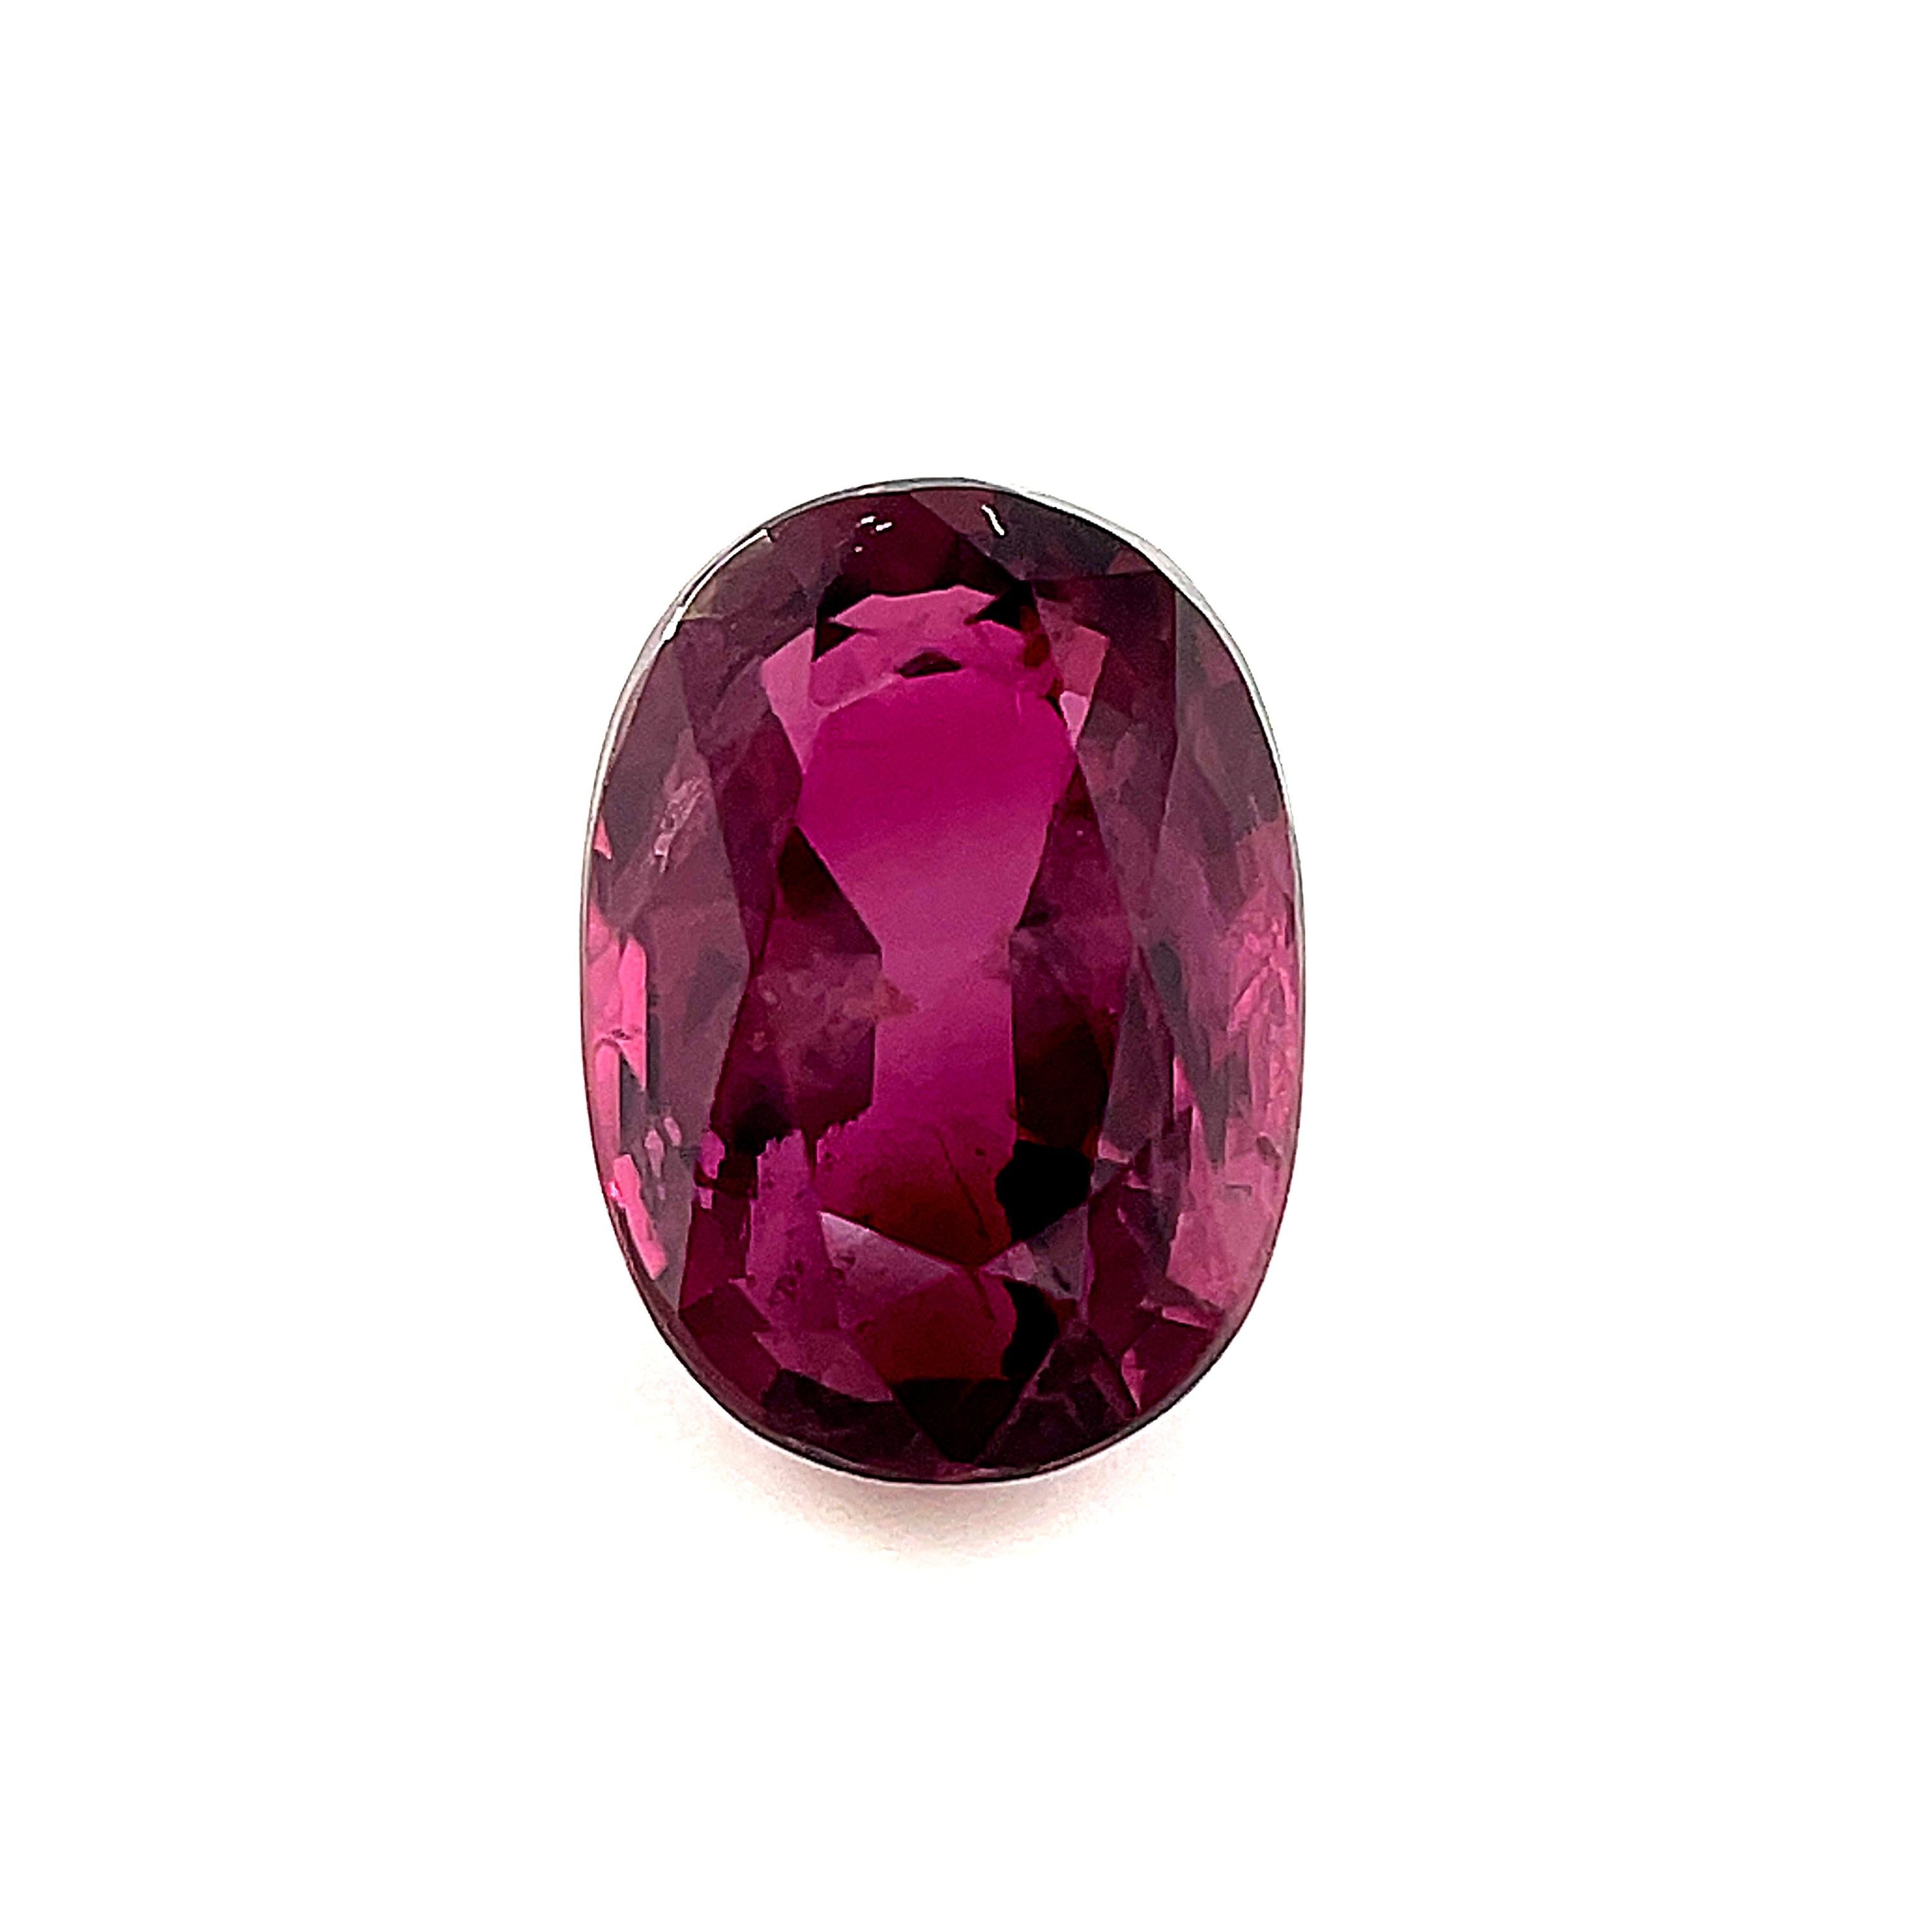 Women's or Men's 1.24 Carat Oval Loose Unset Ruby Gemstone For Sale